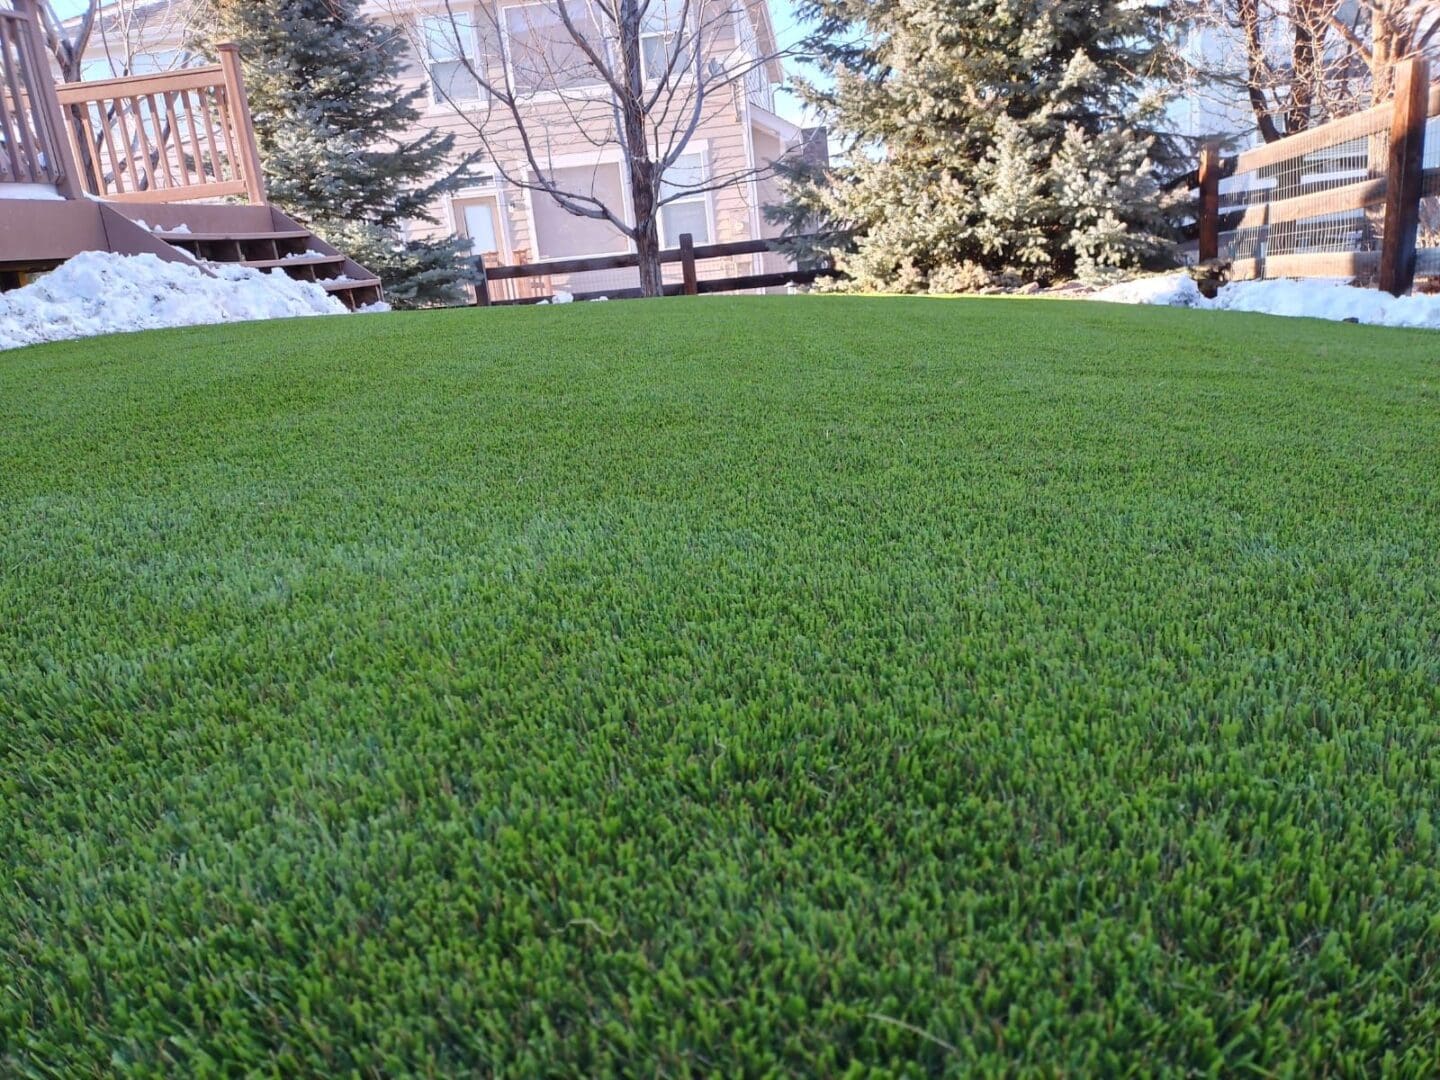 A green lawn with trees in the background